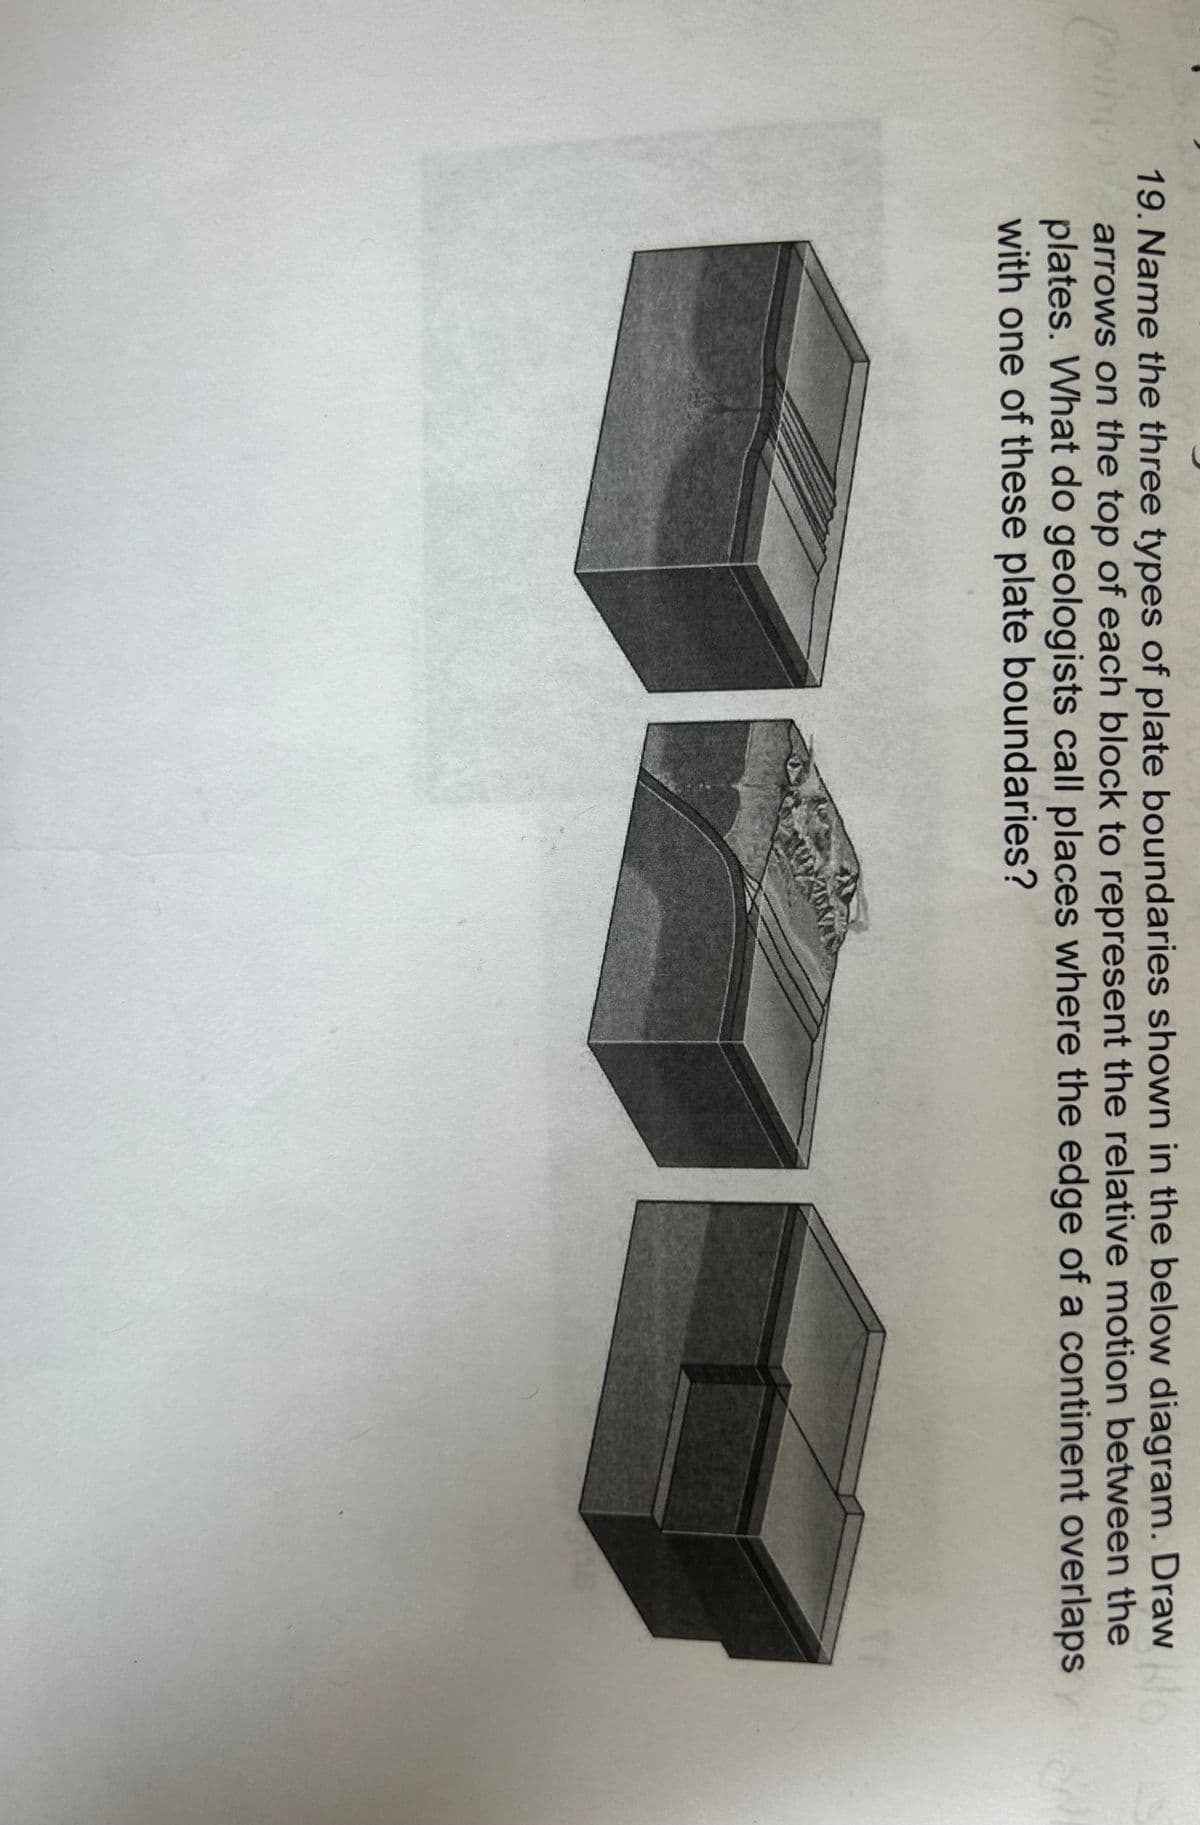 19. Name the three types of plate boundaries shown in the below diagram. Draw
arrows on the top of each block to represent the relative motion between the
plates. What do geologists call places where the edge of a continent overlaps
with one of these plate boundaries?